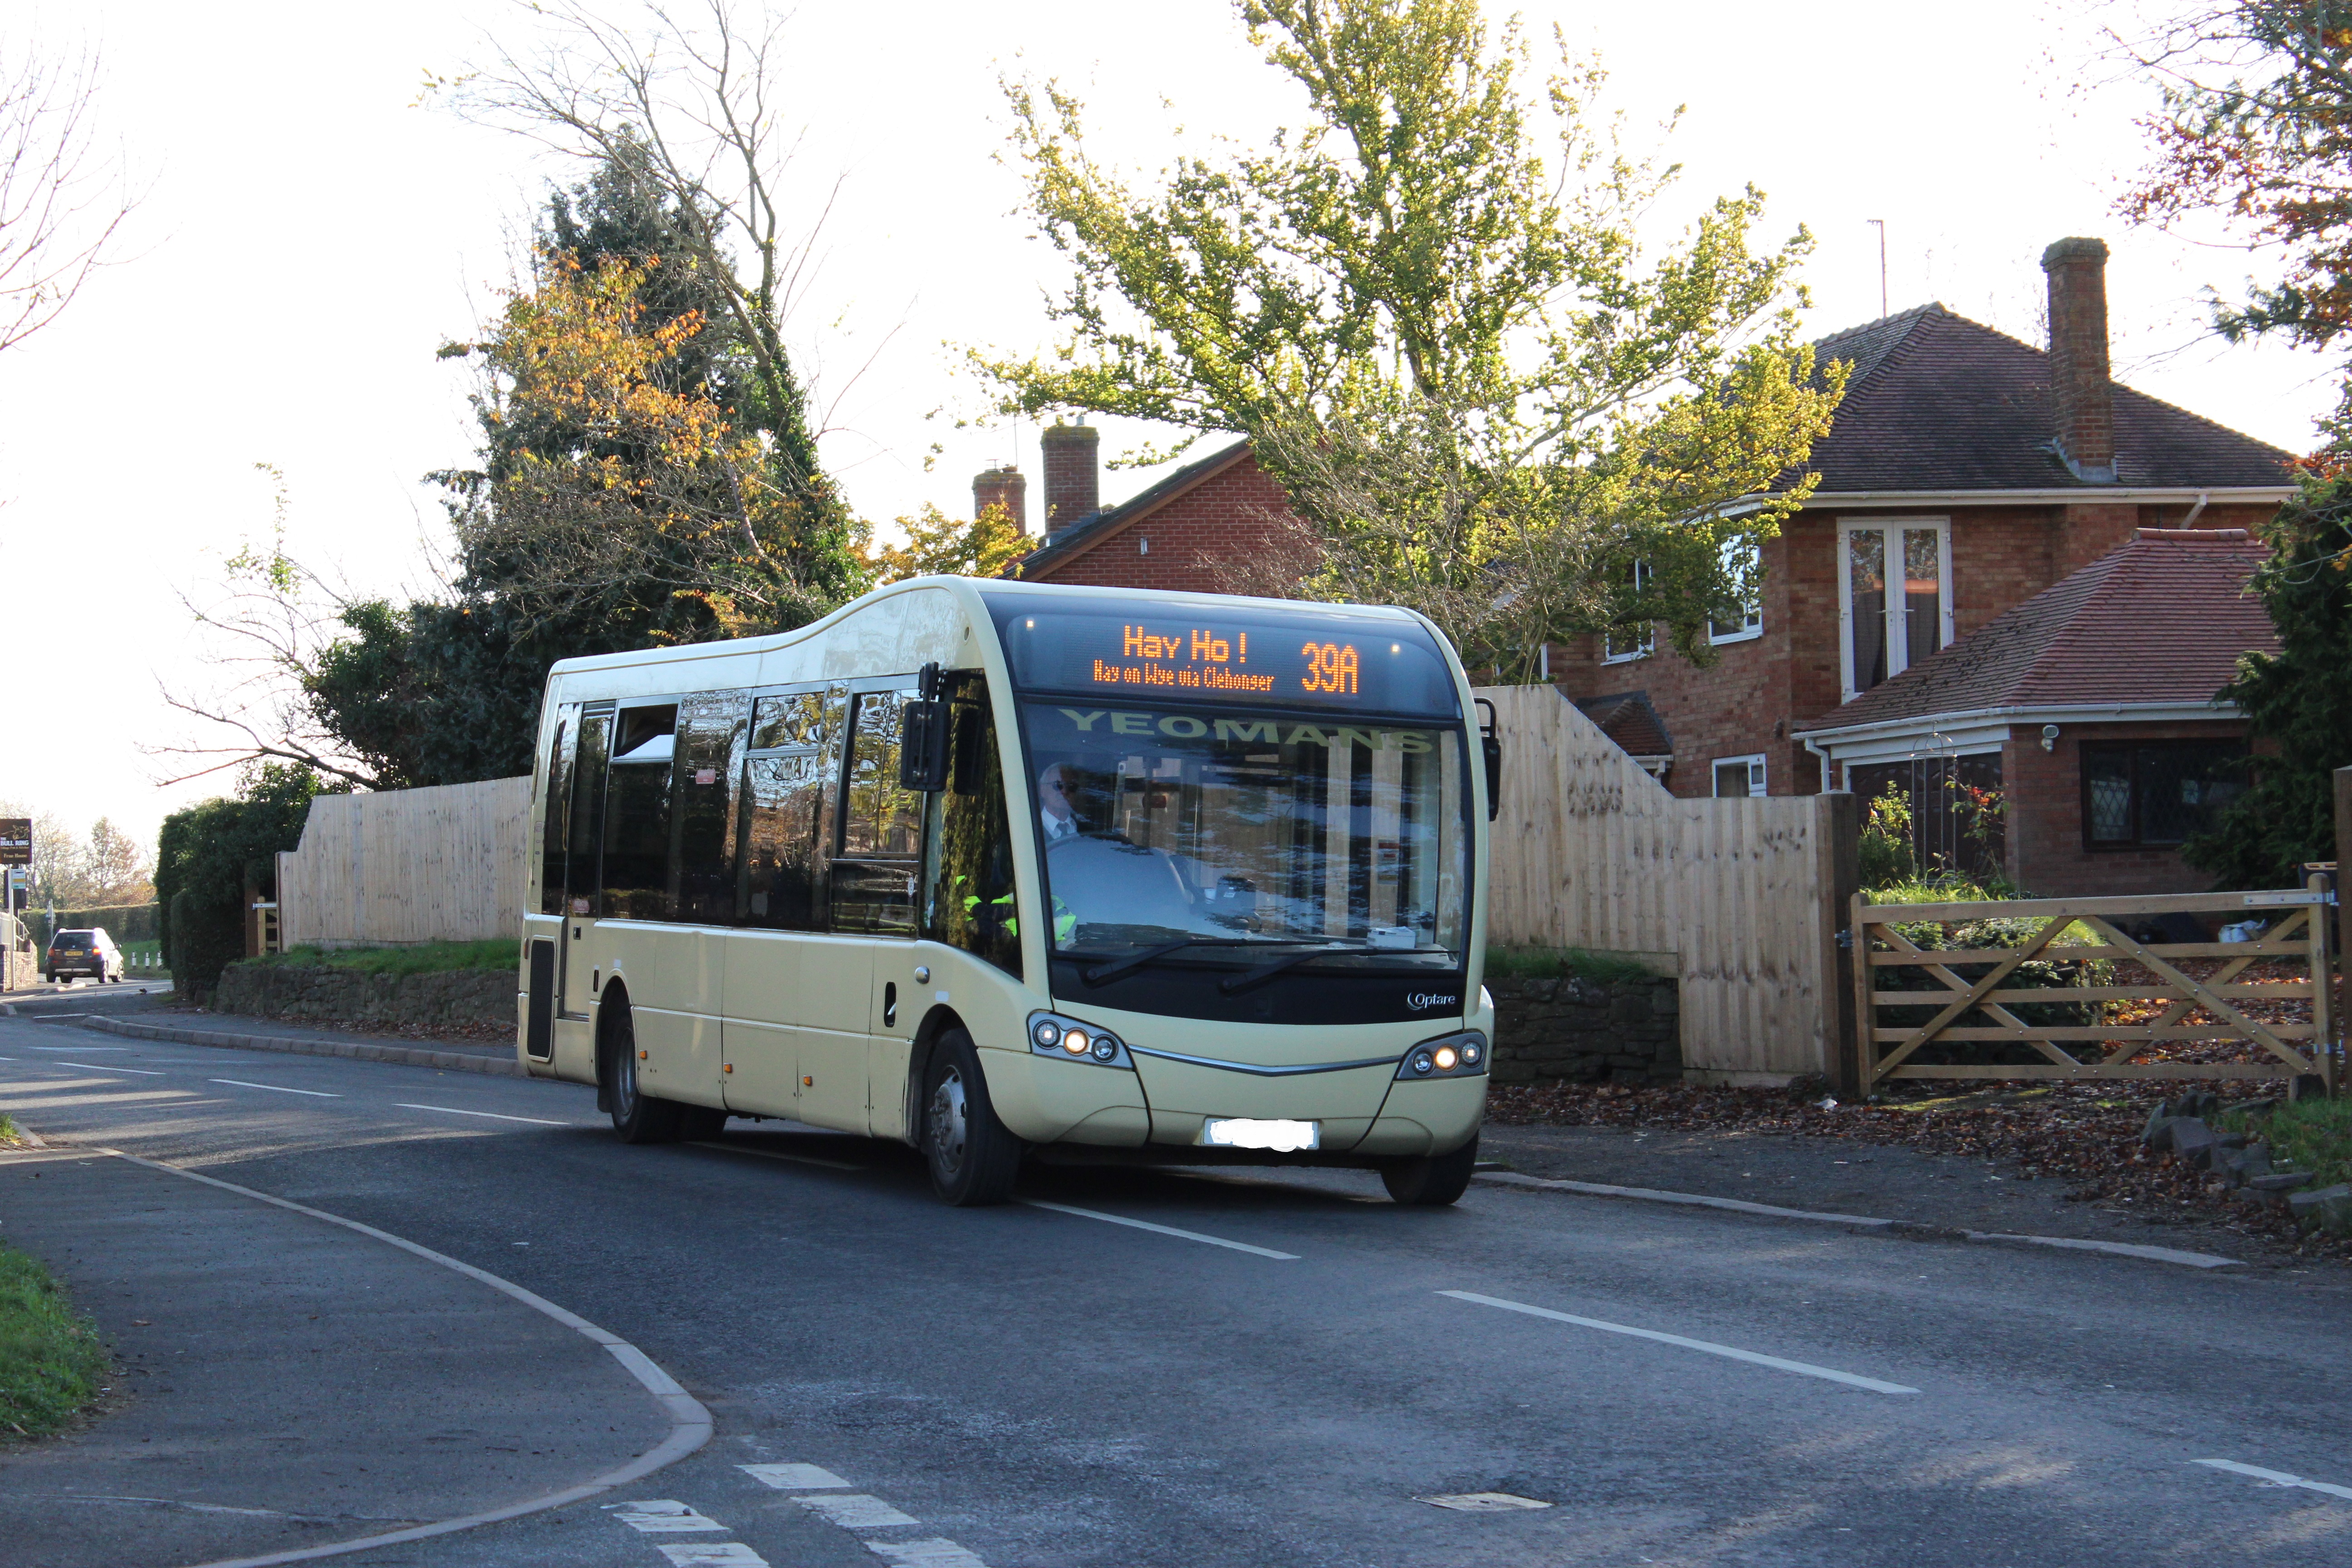 A picture of a local bus passing through Kingstone